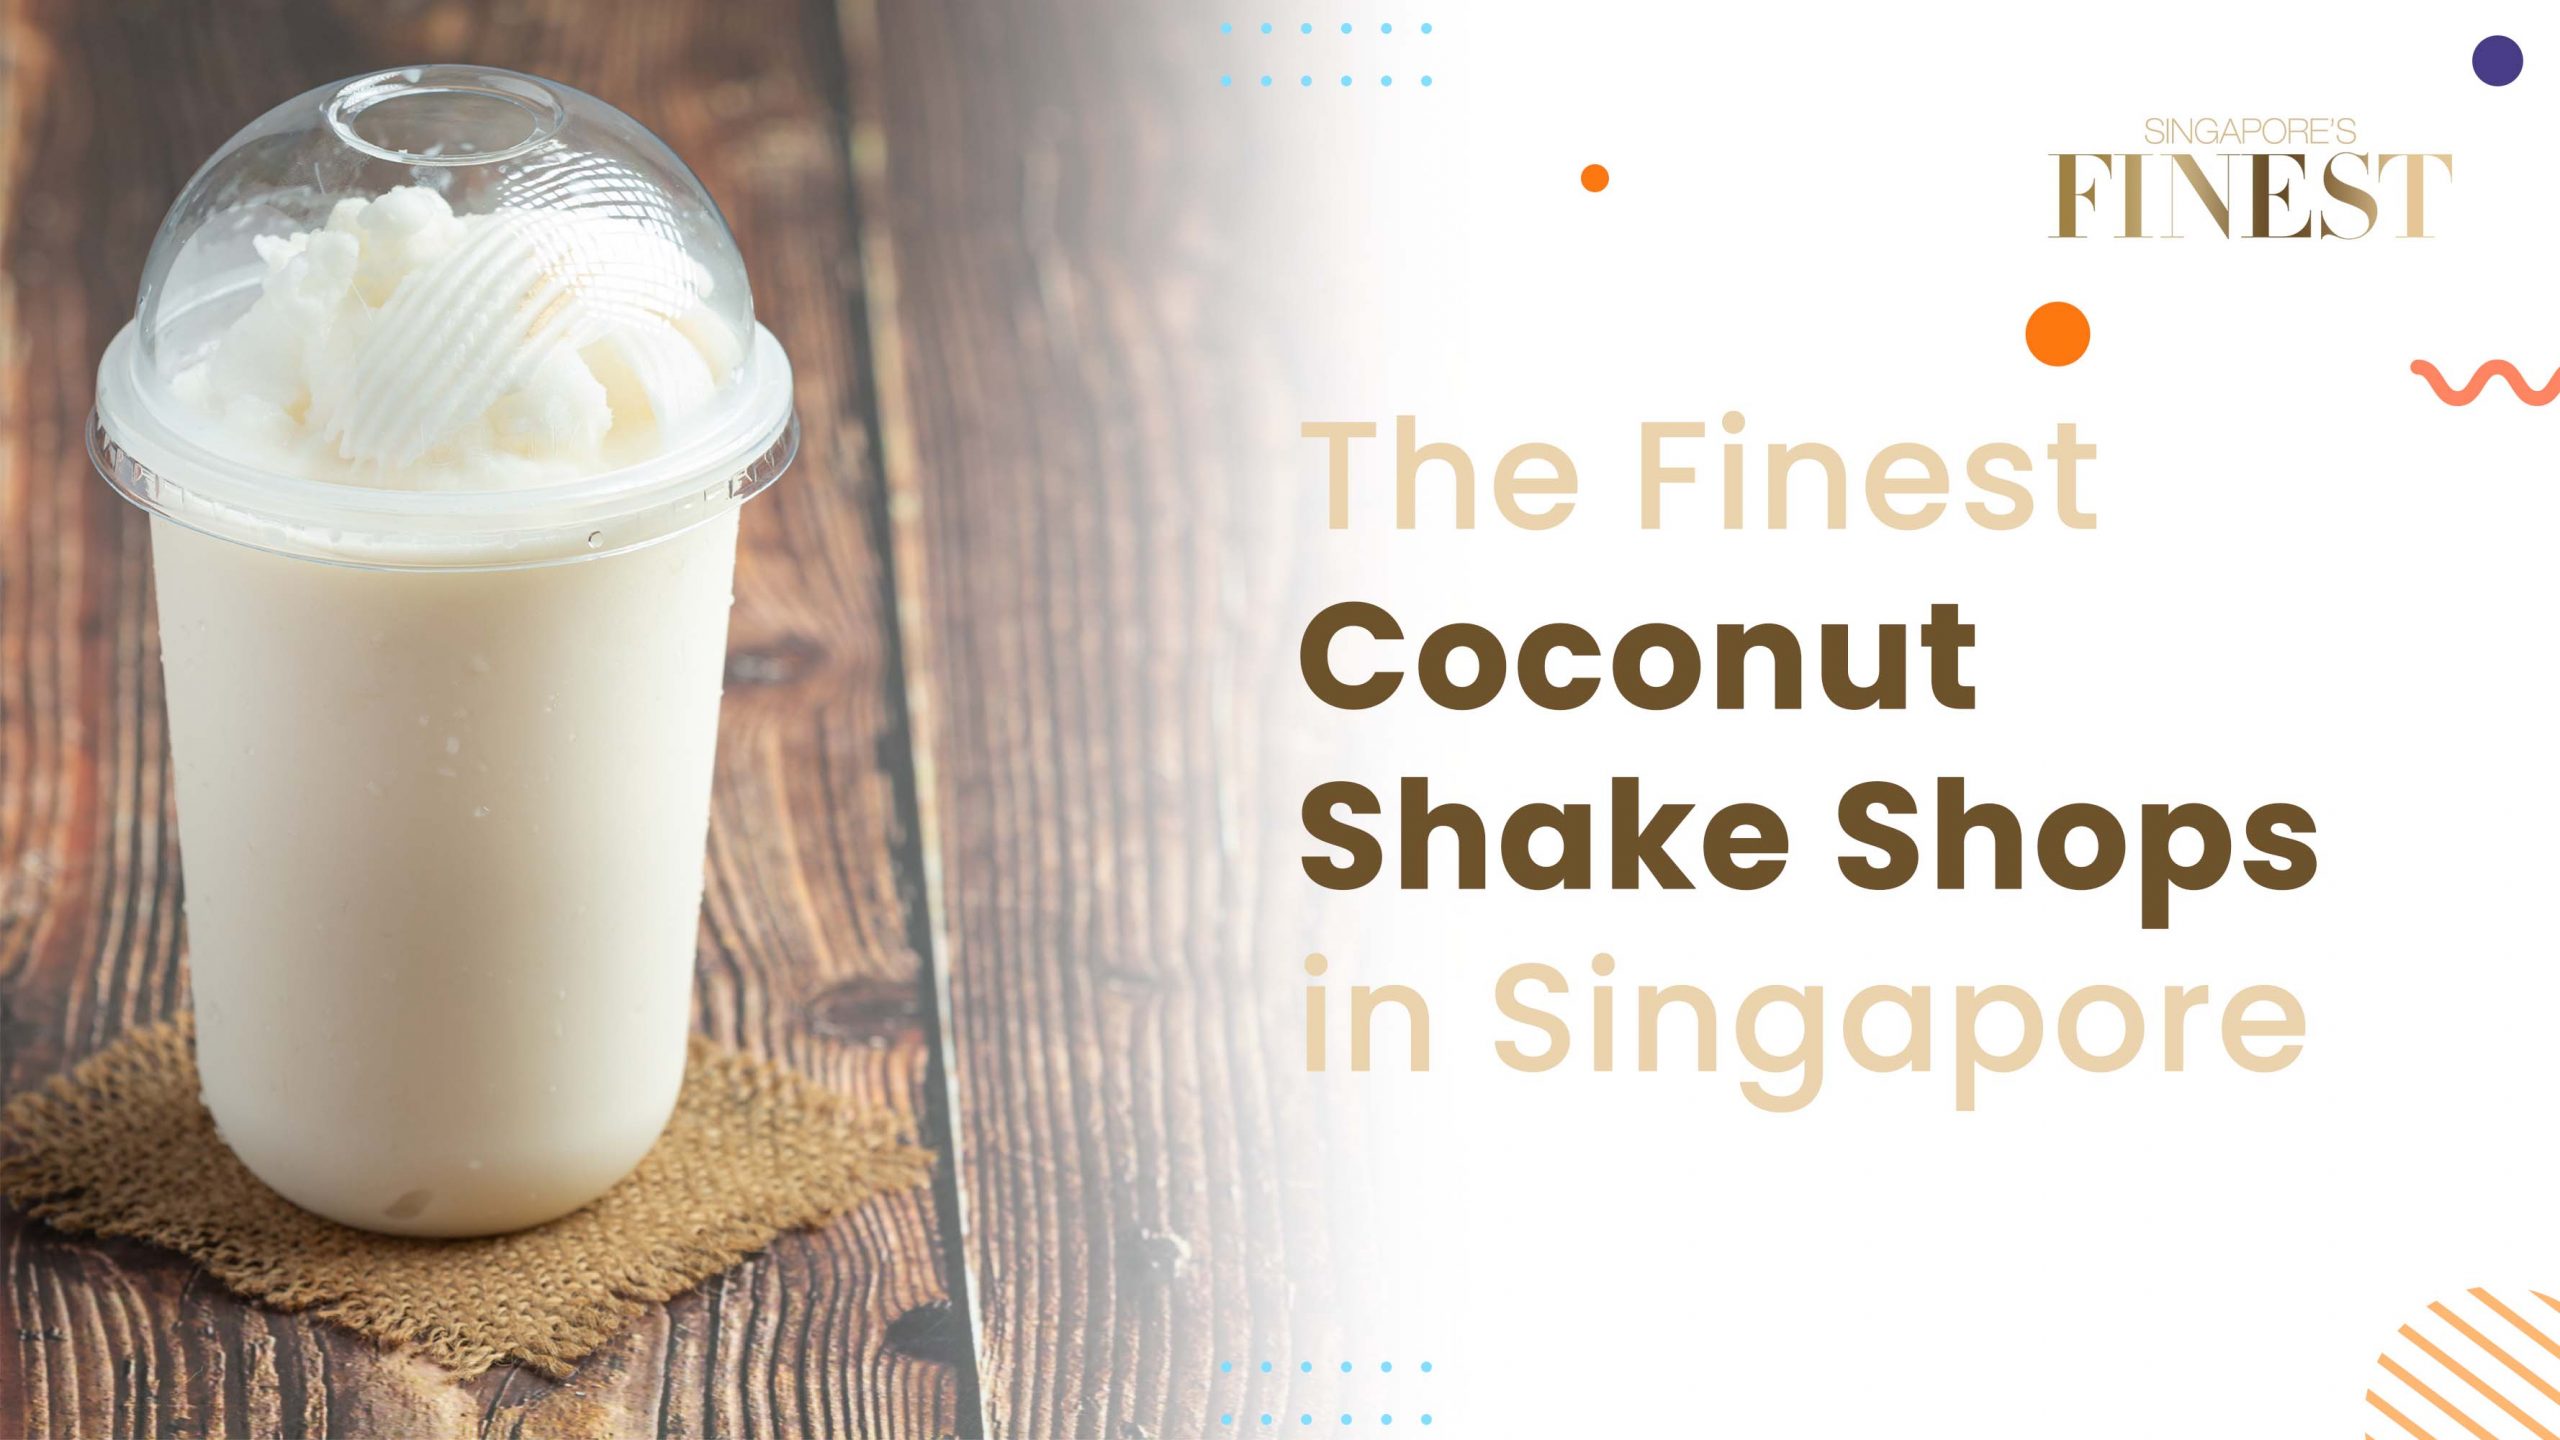 Finest Coconut Shake Shops in Singapore